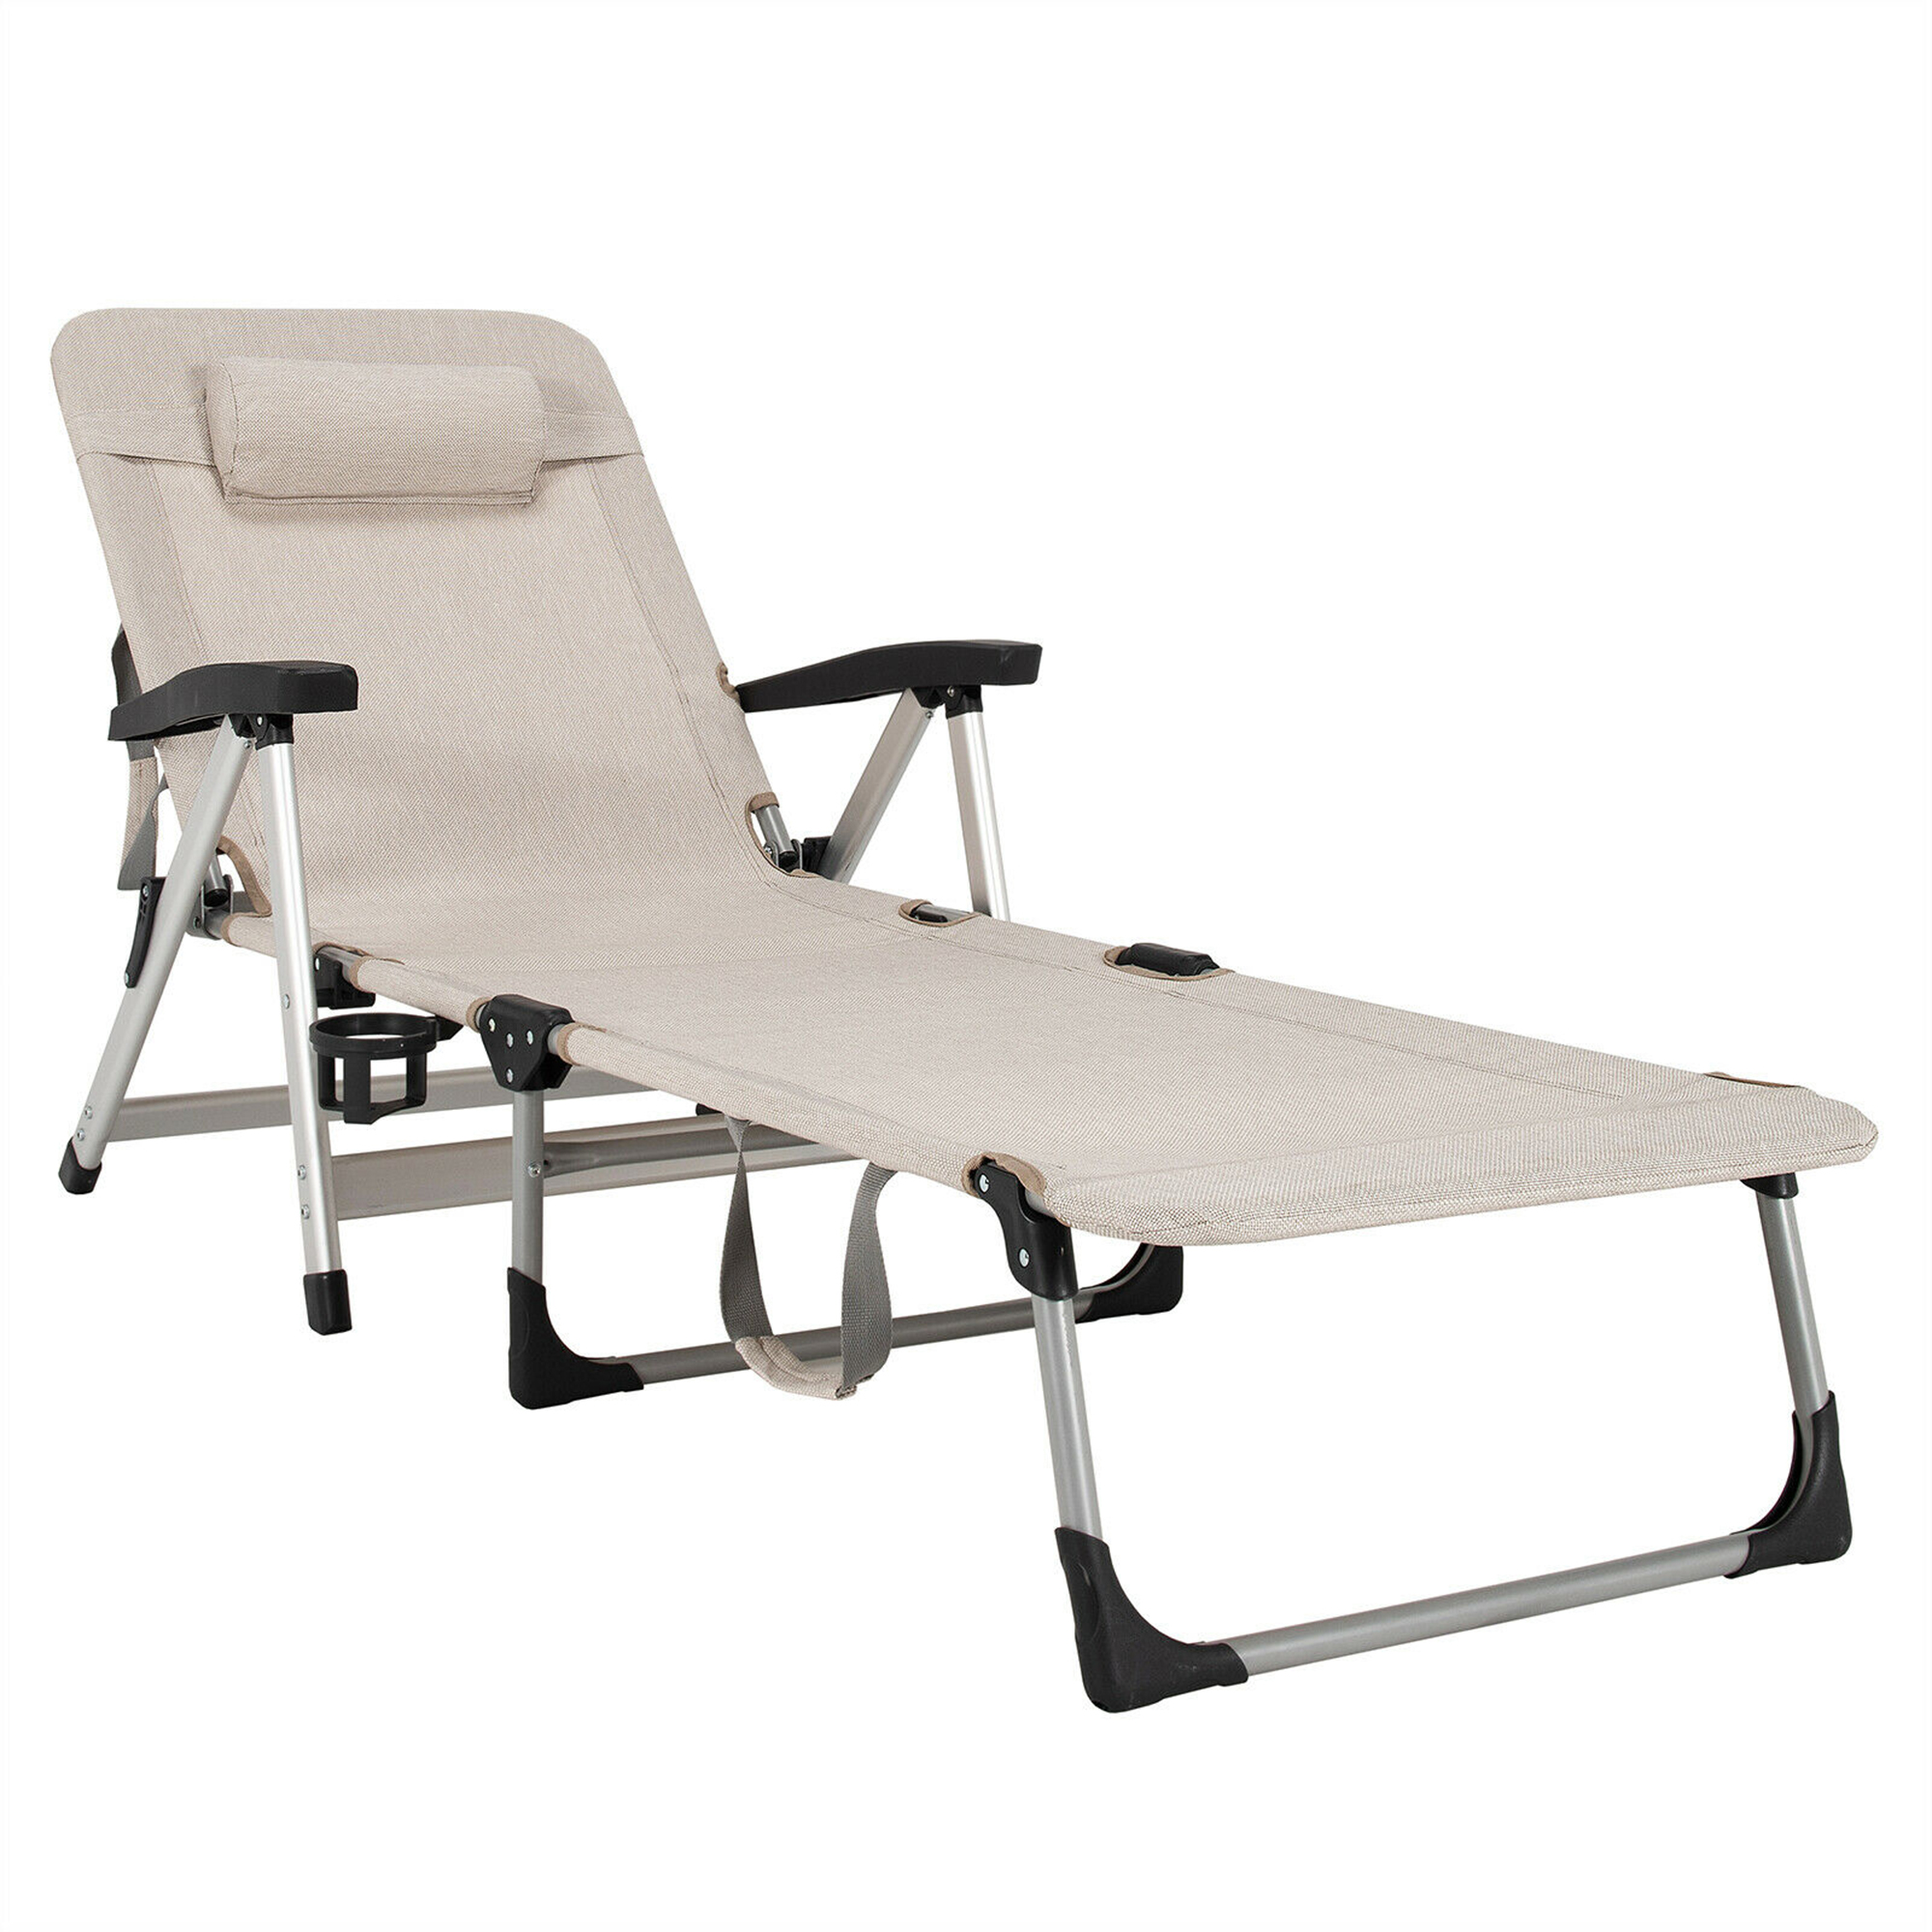 Gymax Beach Chaise Lounge Chair Patio Folding Recliner w/ 7 Adjustable Positions Beige - image 1 of 10